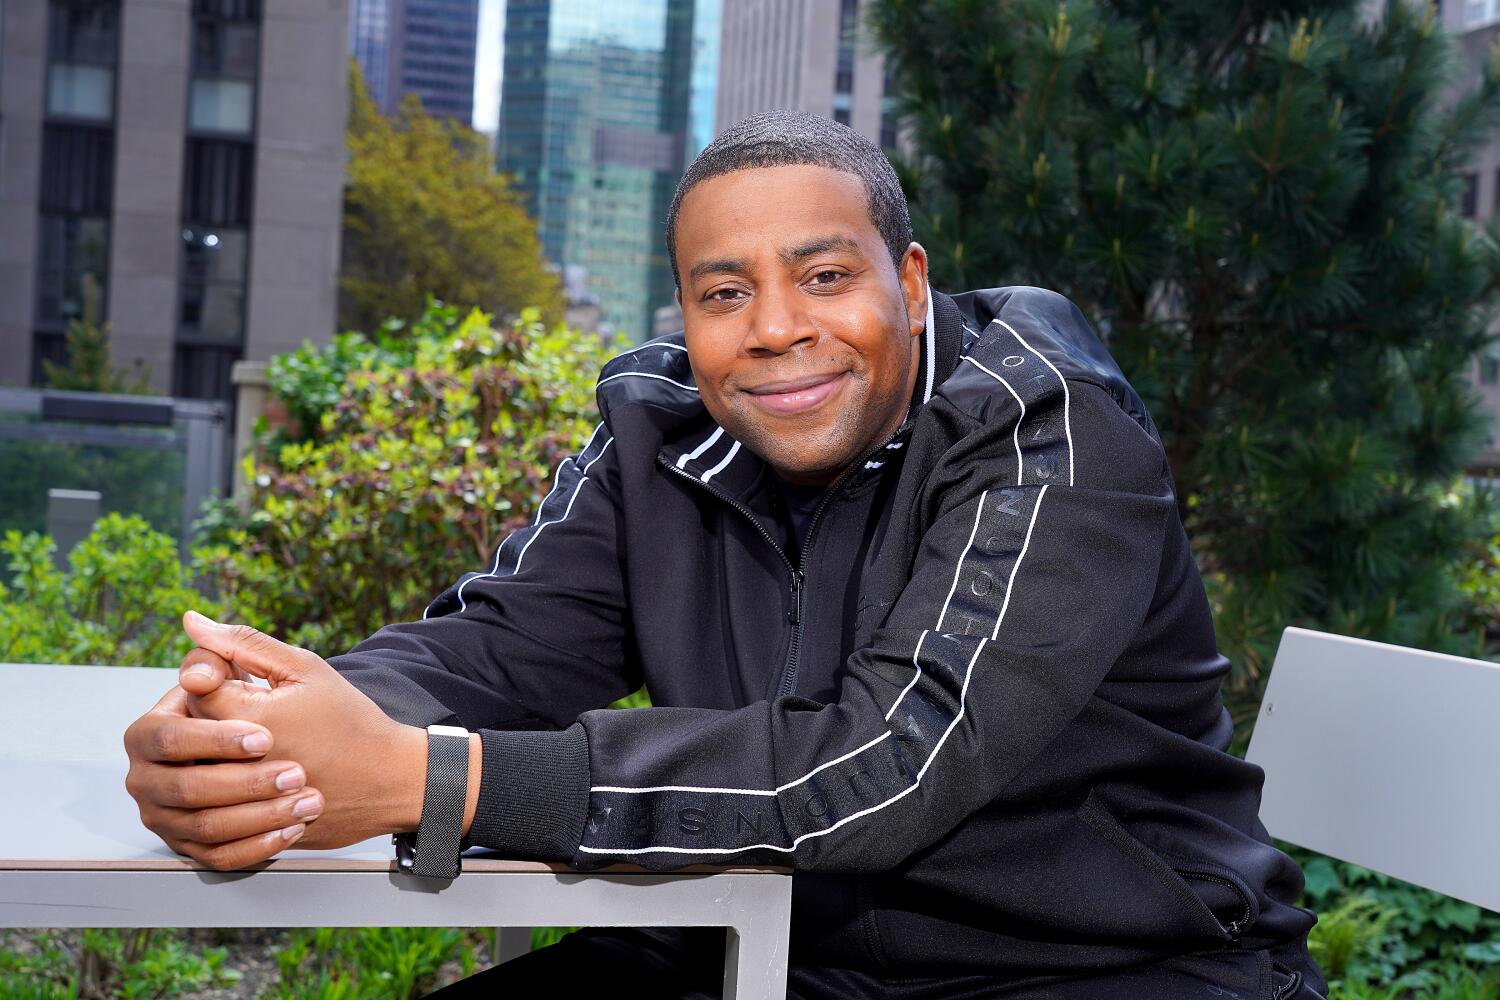 Amid Quiet on Set fallout, Kenan Thompson says sets for kids shows should be a safe place